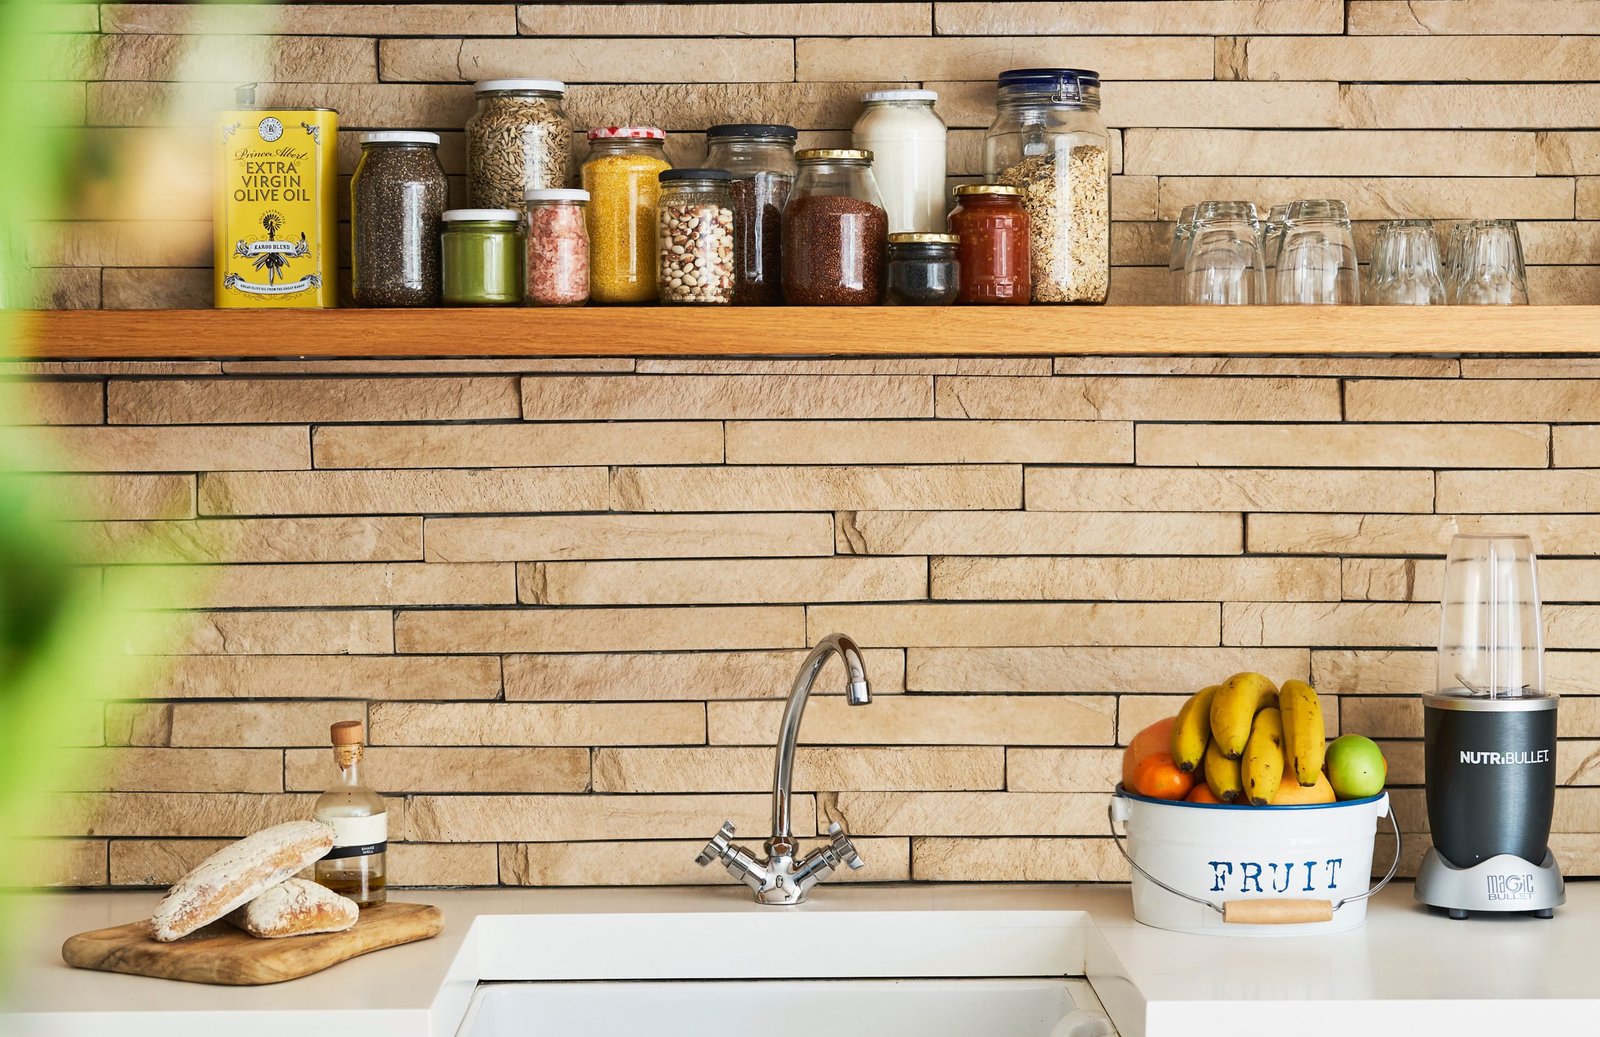 Notify Problems Before Buying Kitchen Products